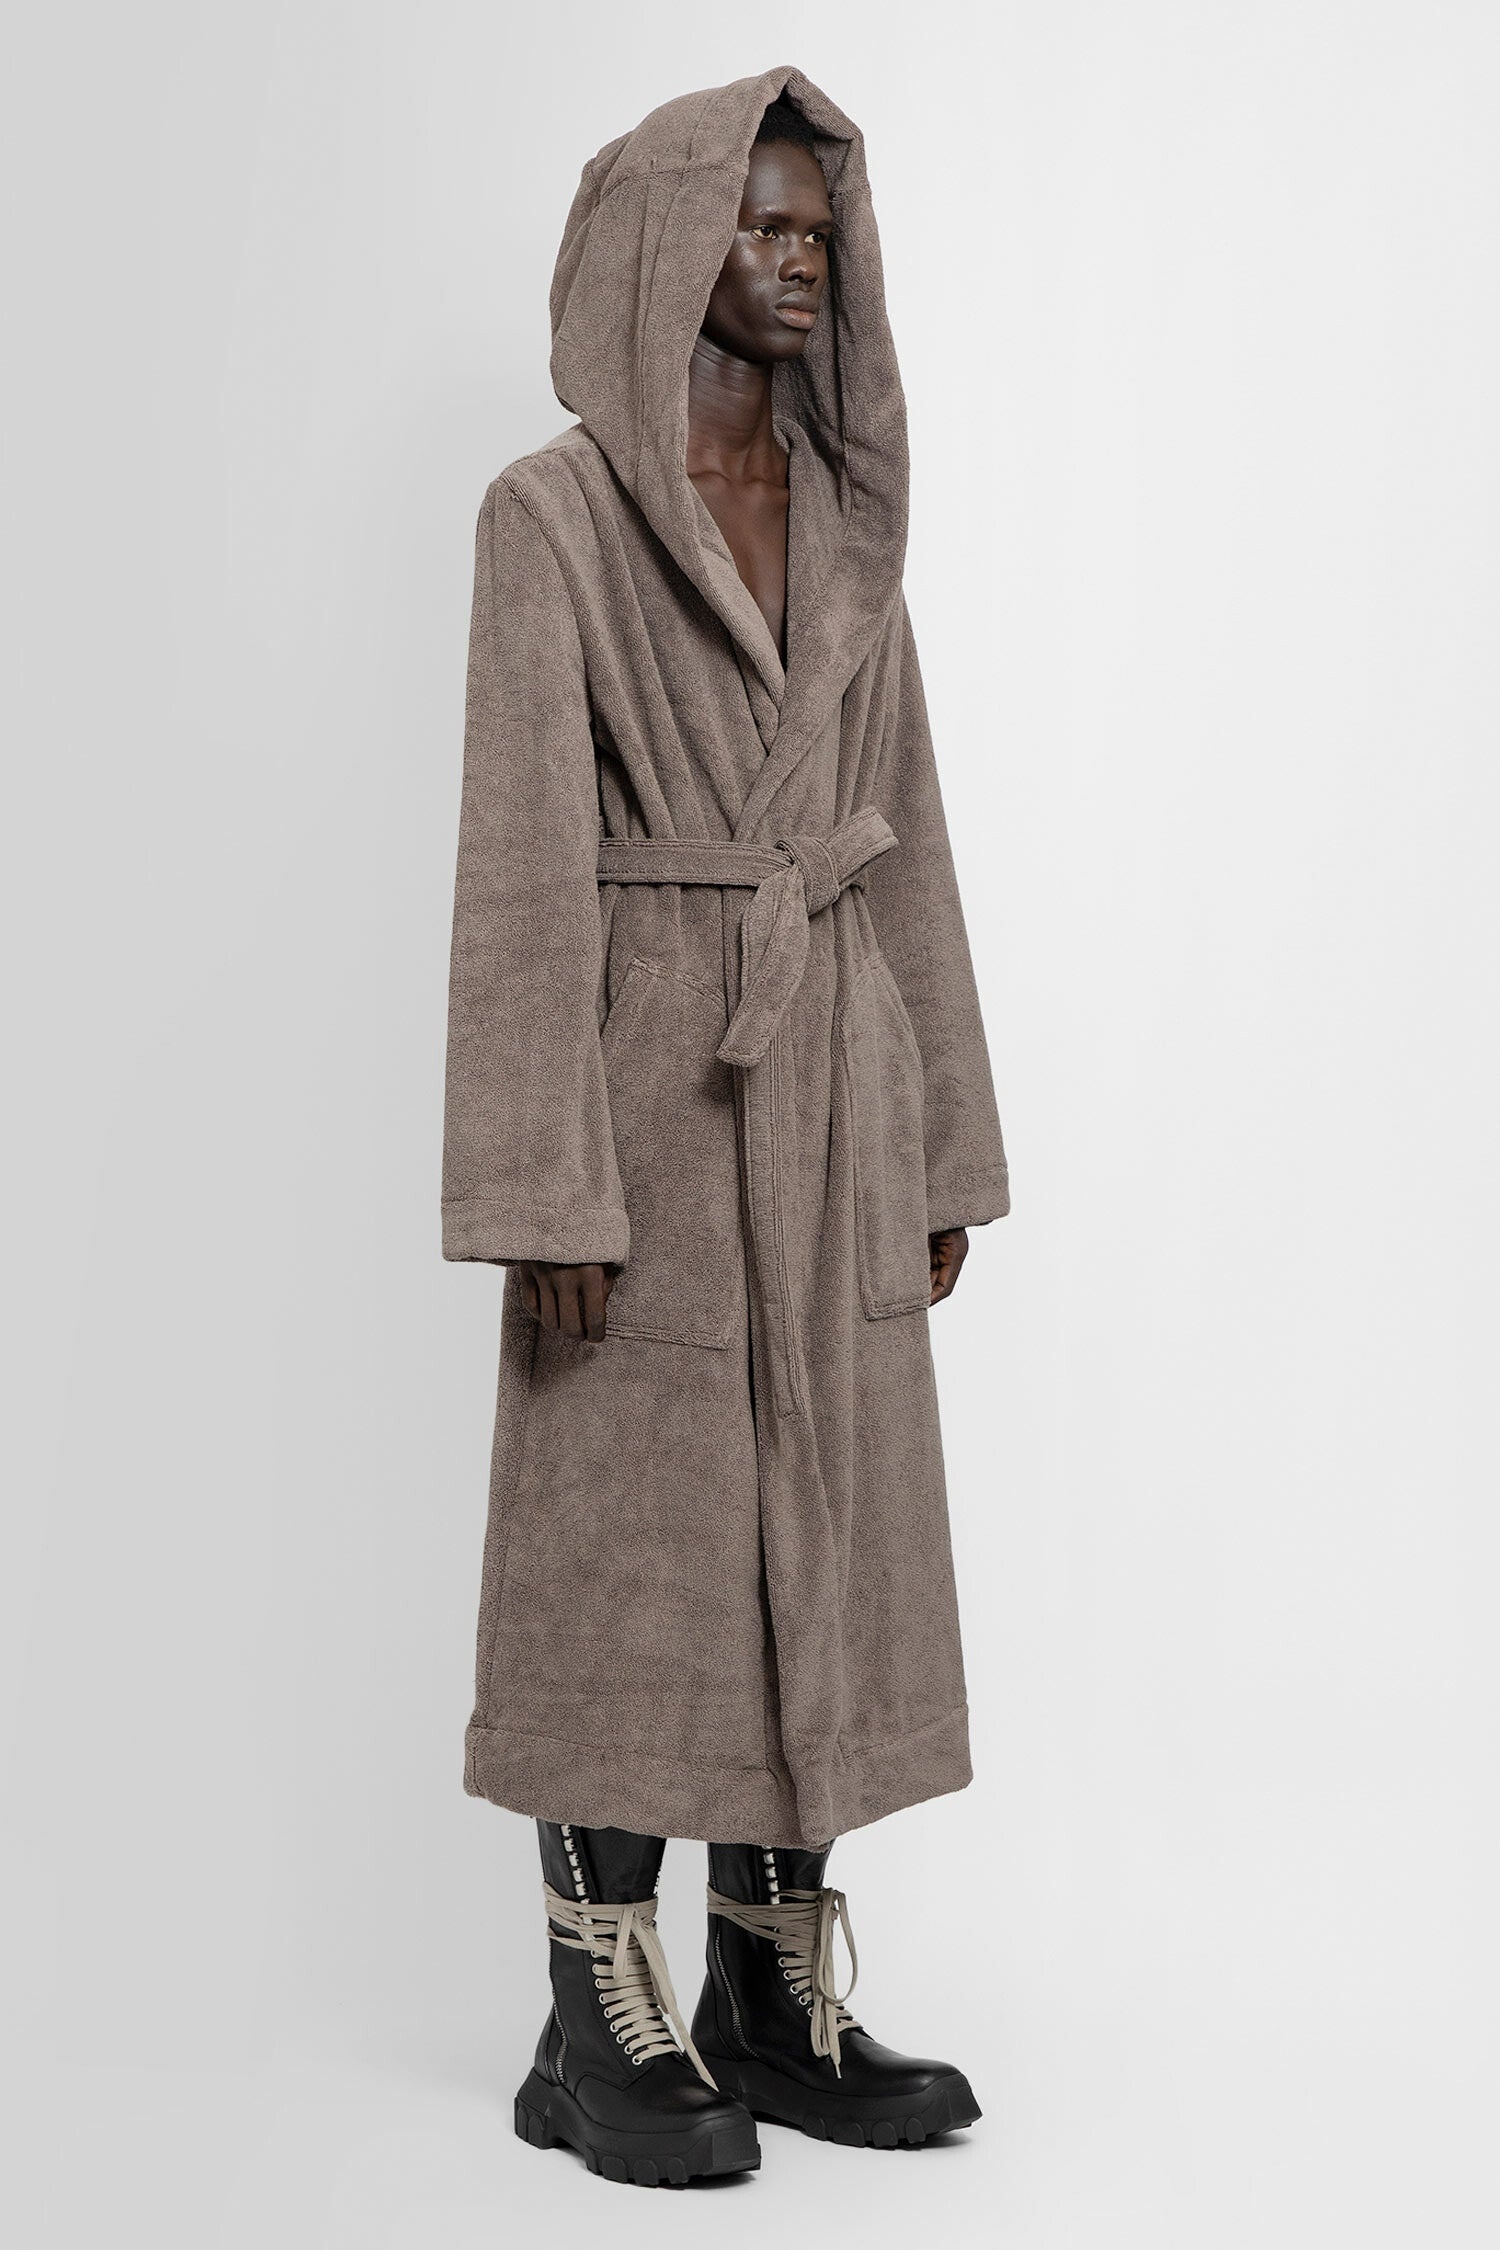 RICK OWENS MAN BROWN OBJECTS - 2